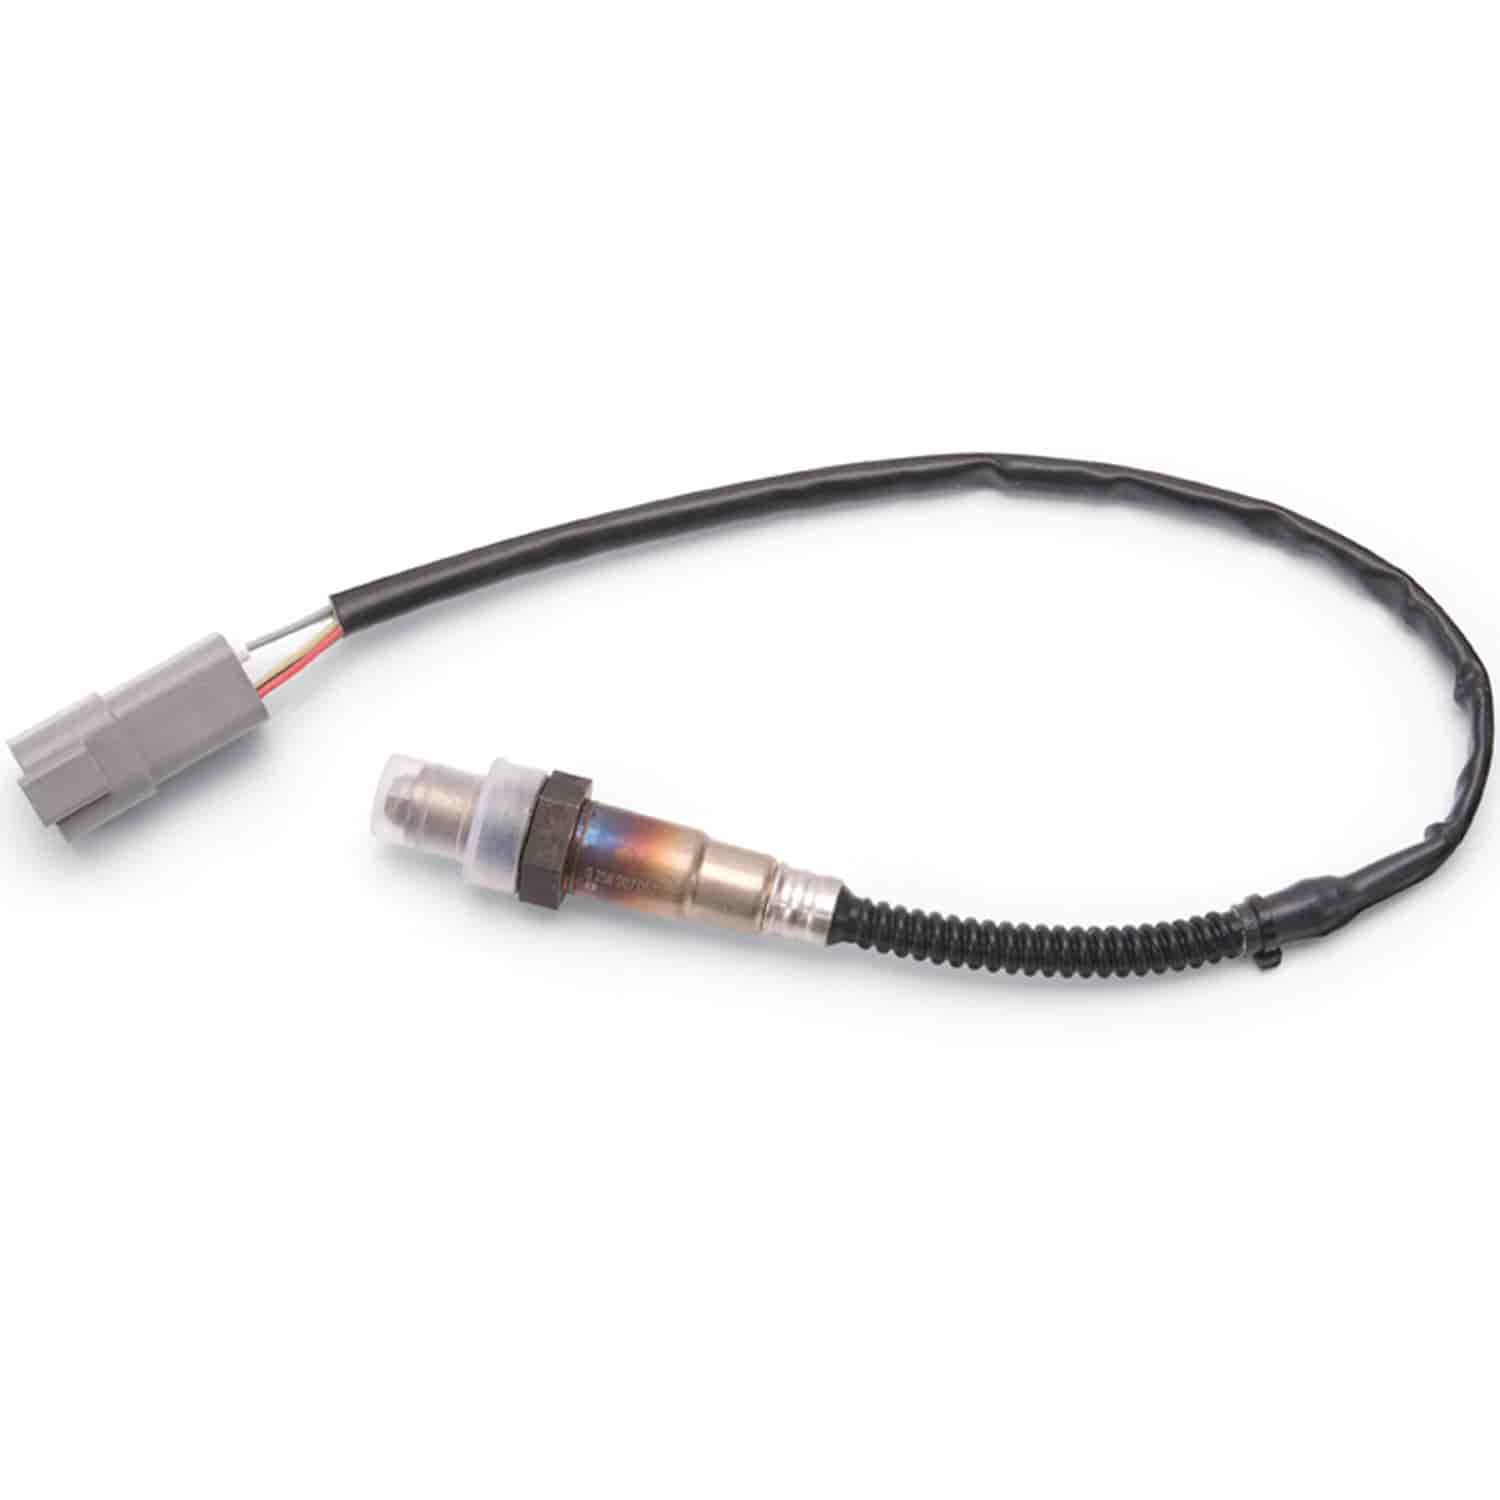 Replacement O2 Sensor for Wide Band Interface Kit